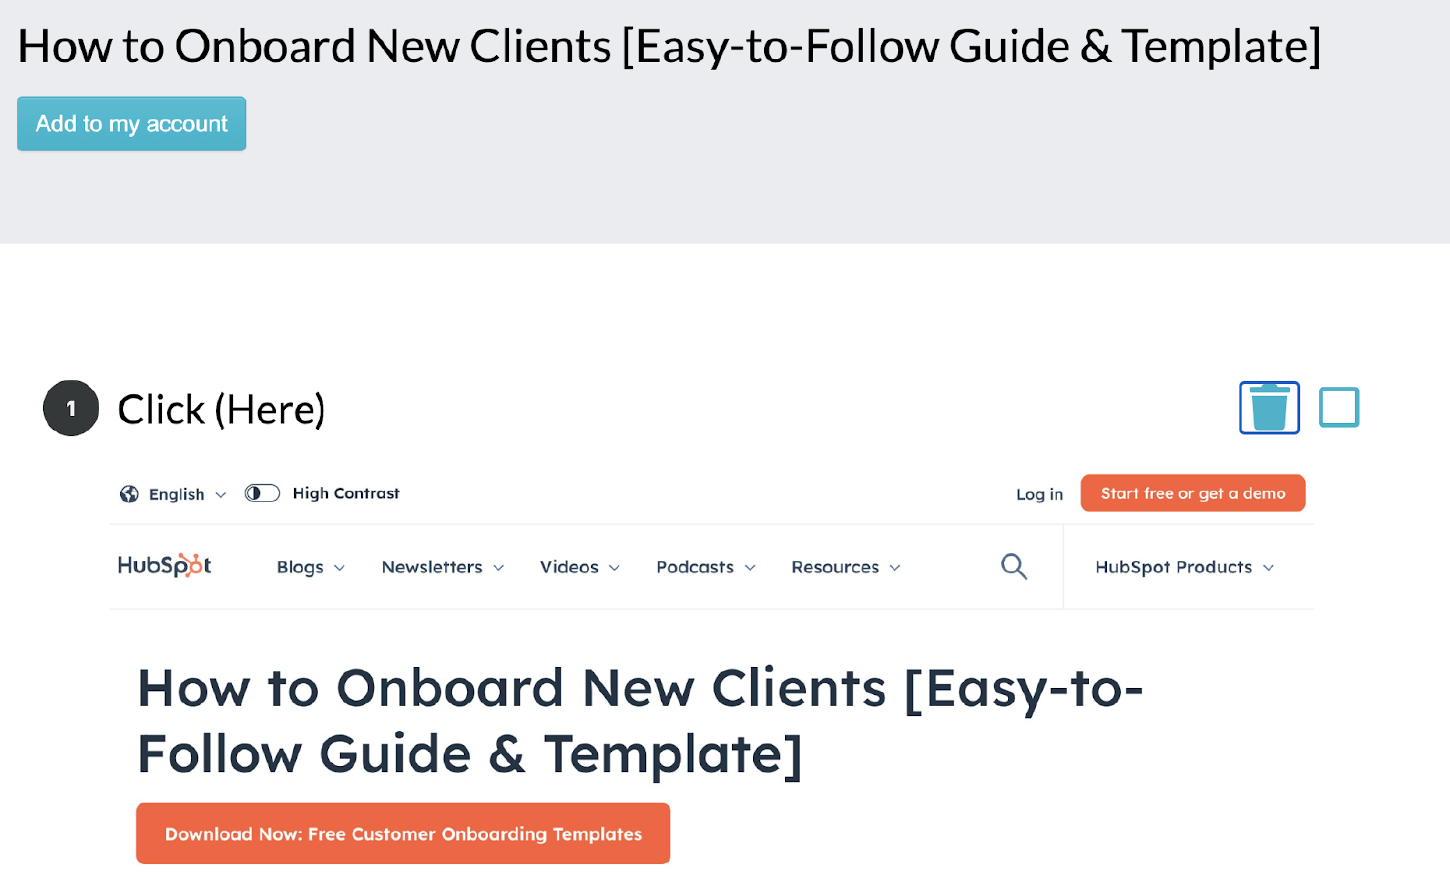 if you want to share details with your team about how to onboard new clients from the web, here’s how to do it